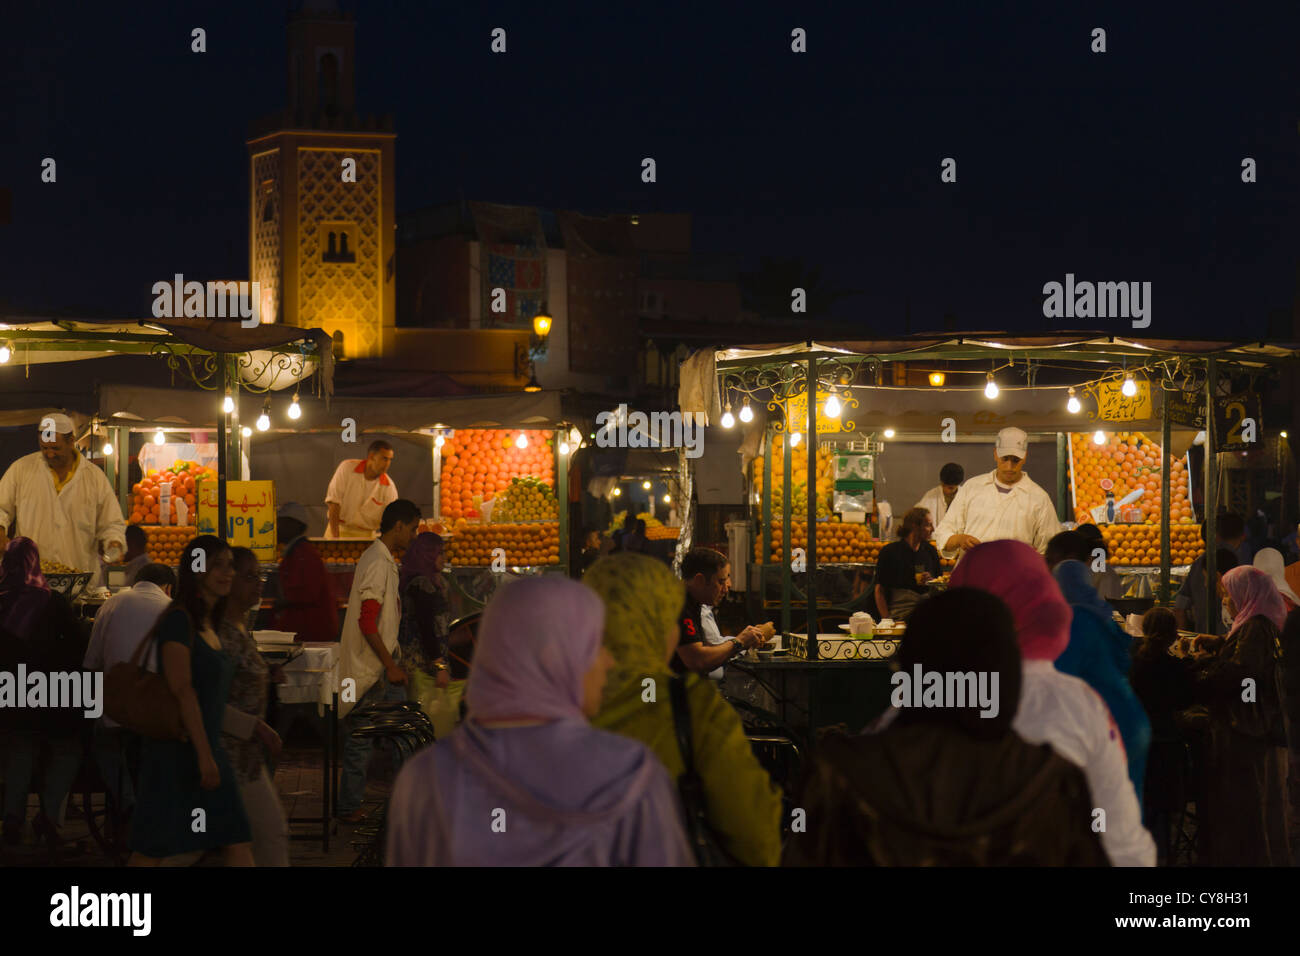 Night view of market in Jema al-Fna Square dominated by Koutoubia Mosque in Marrakech, Morocco Stock Photo